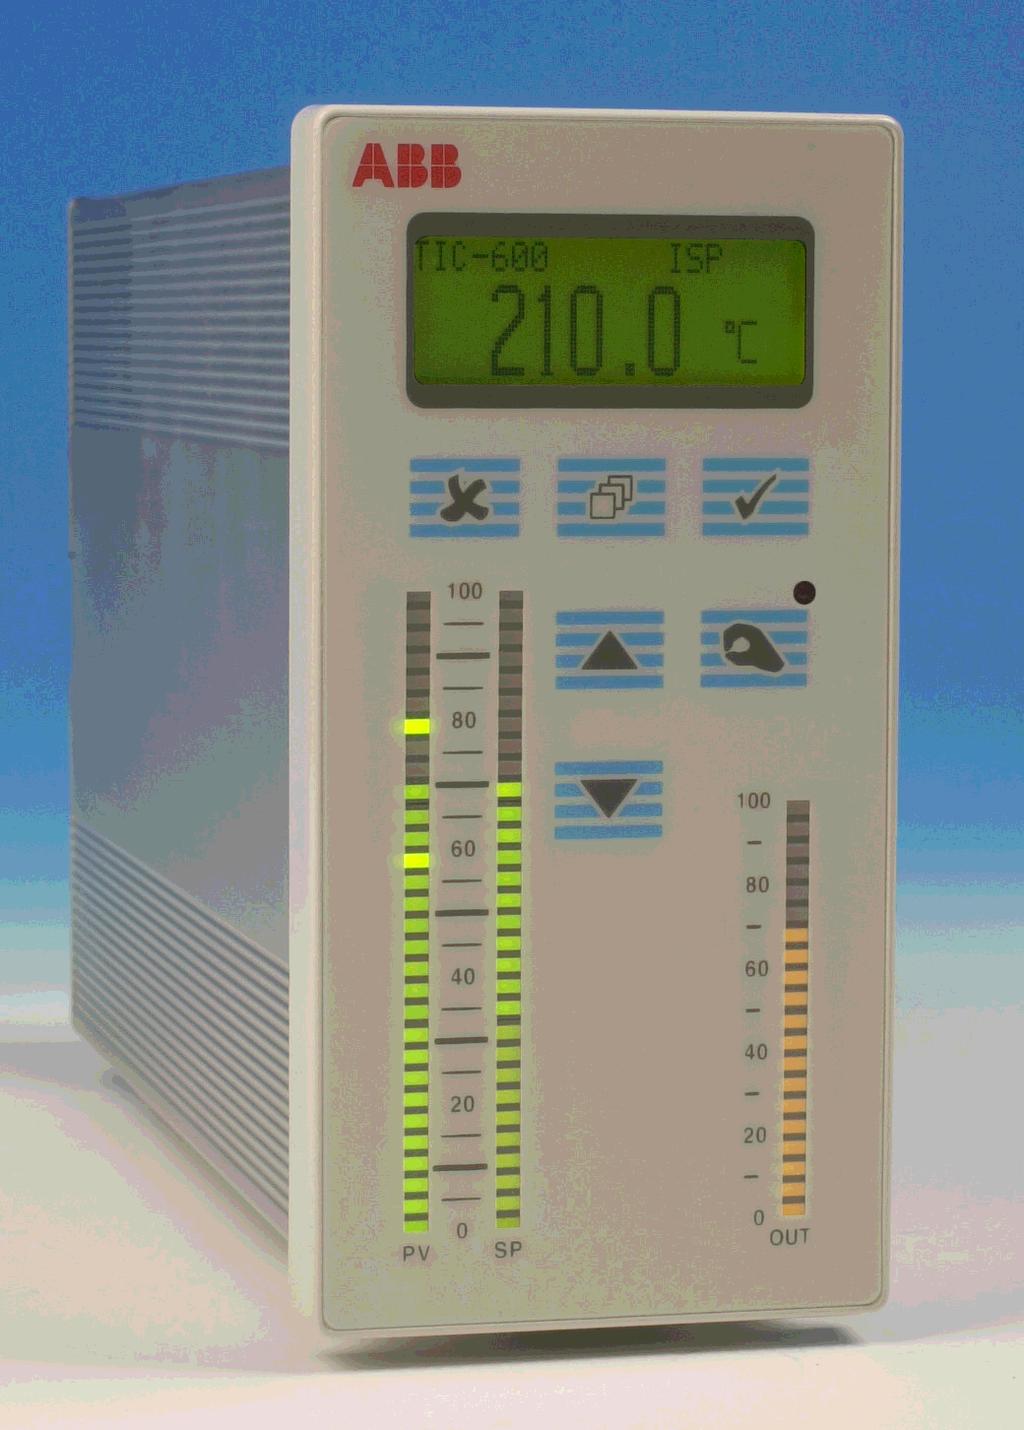 An Industrial PID Controller Some issues Operation modes: Manual, Automatic